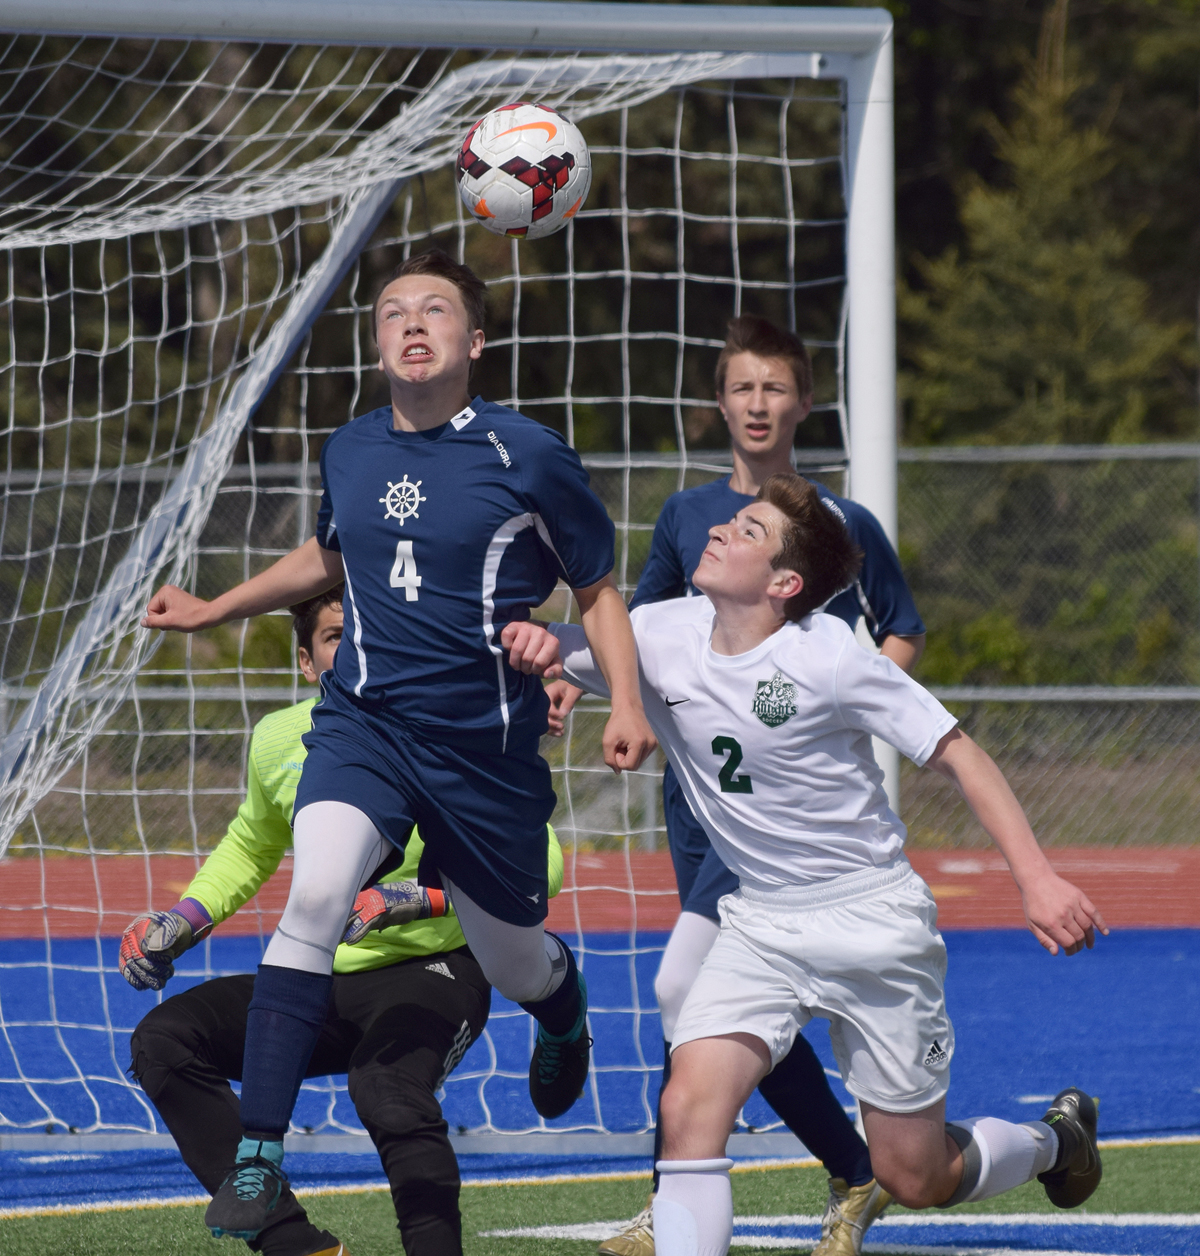 Homer defender Timothy Blakely (4) makes a saving header on a corner kick over Colony midfielder Kyle Dearborn (2) Thursday afternoon in a Northern Lights Conference tournament quarterfinal match at Justin Maile Field in Soldotna.-Photo by Joey Klecka/Peninsula Clarion